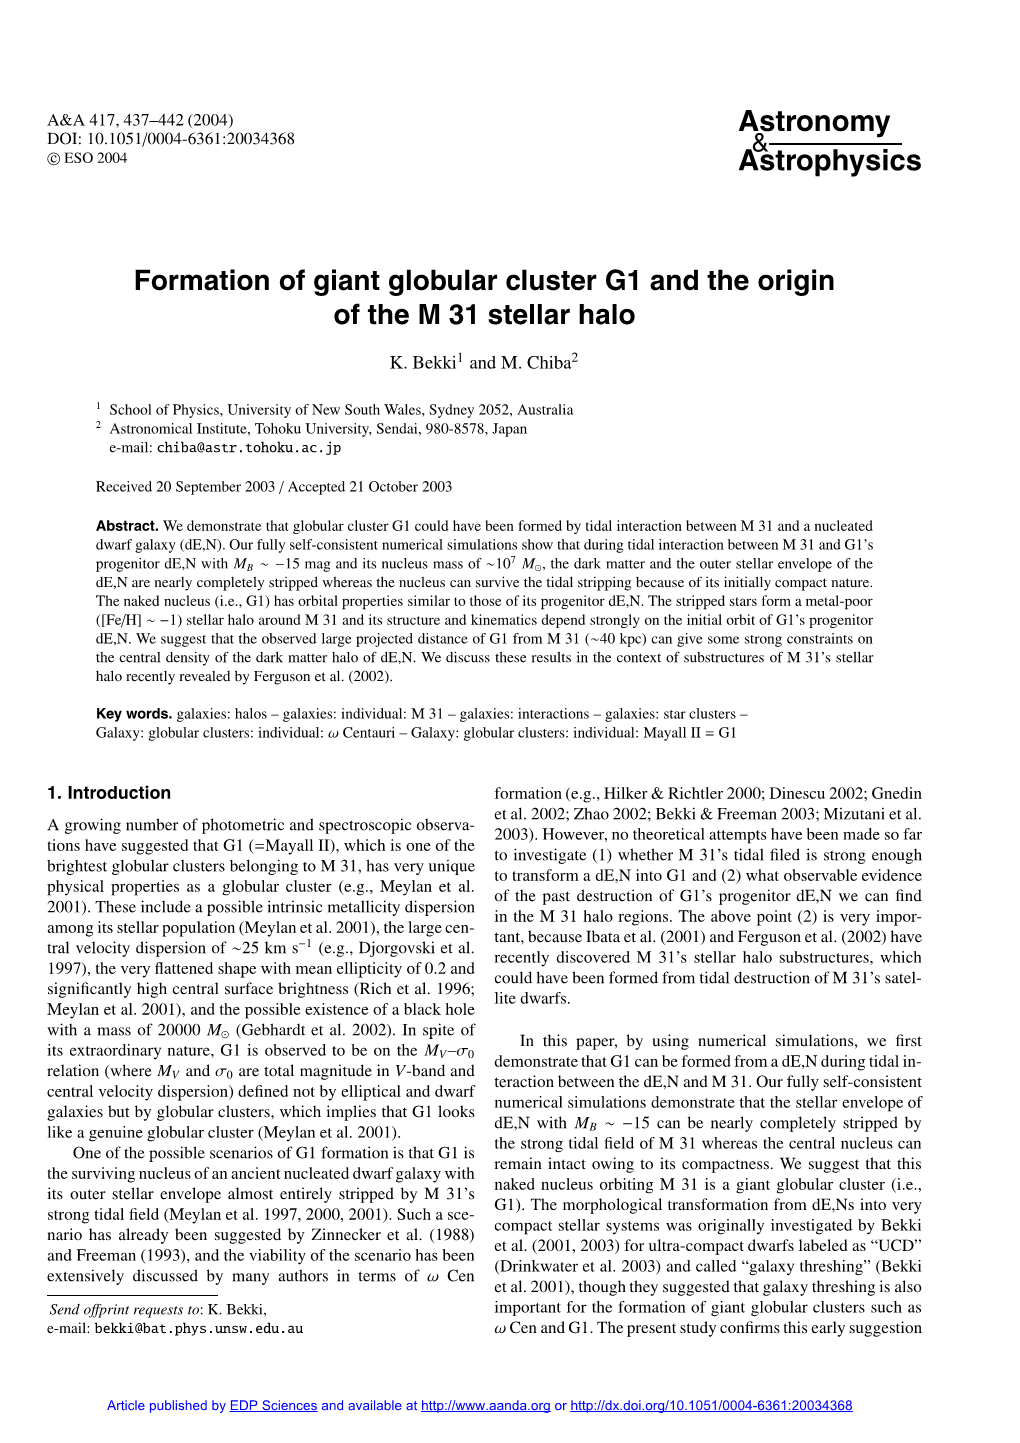 Formation of Giant Globular Cluster G1 and the Origin of the M 31 Stellar Halo